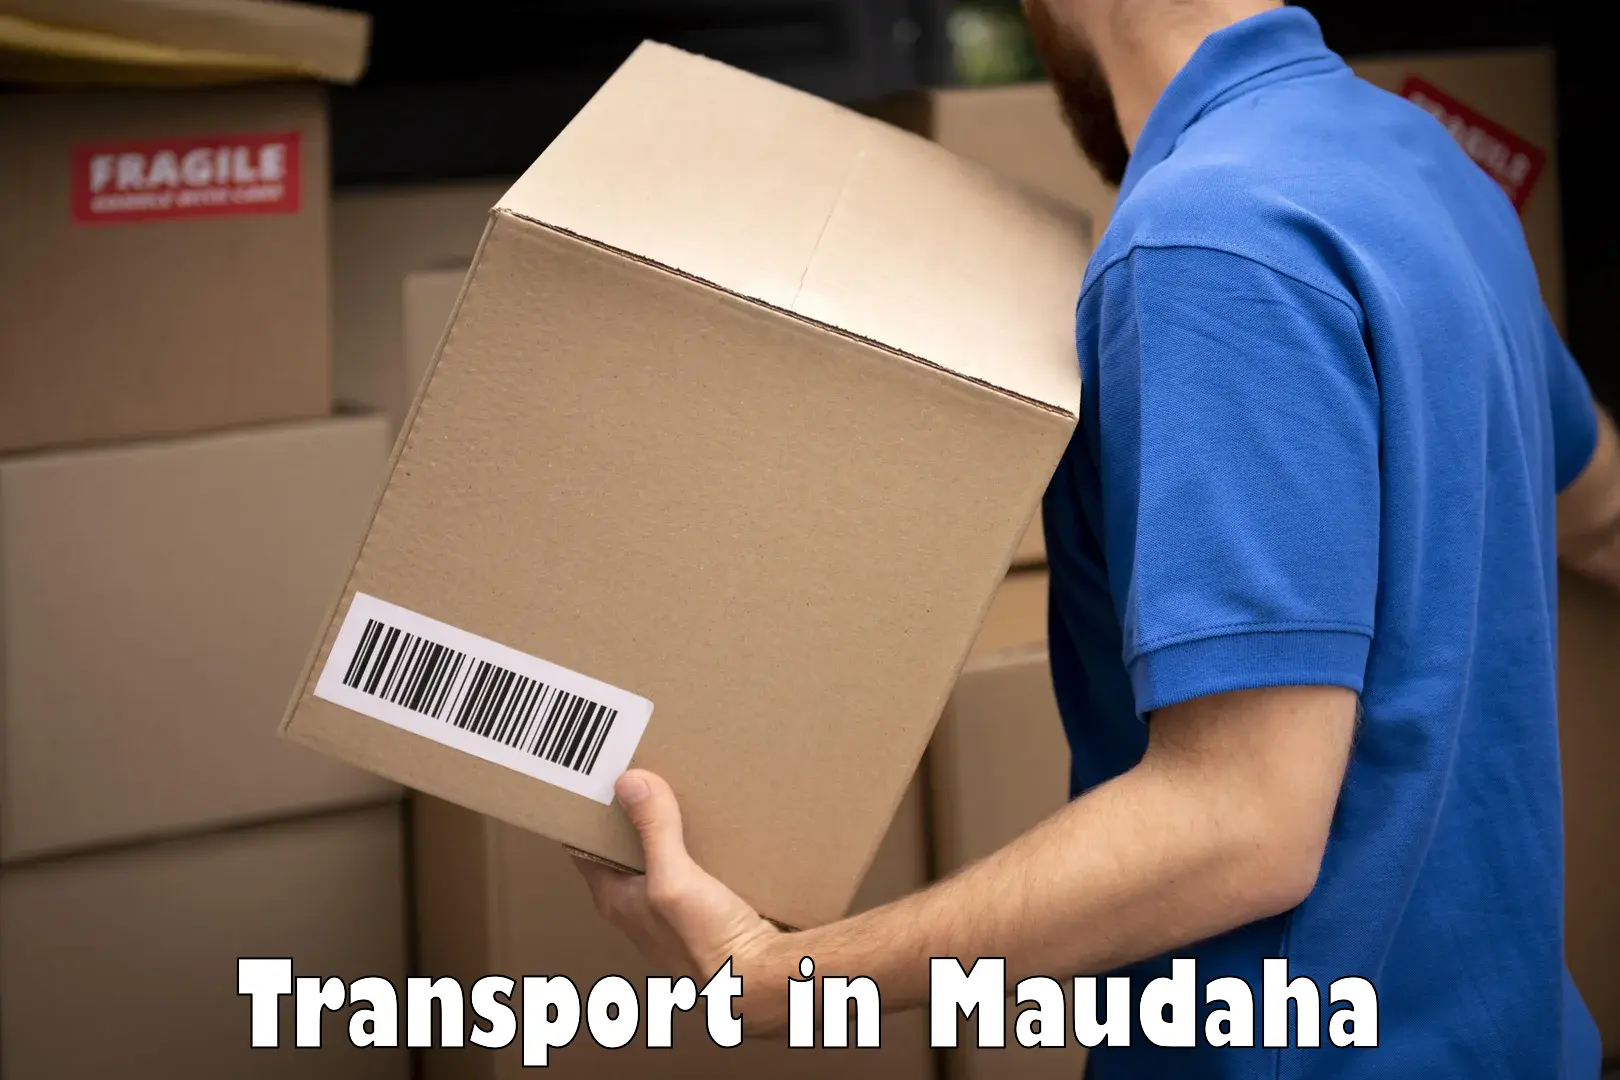 Container transport service in Maudaha